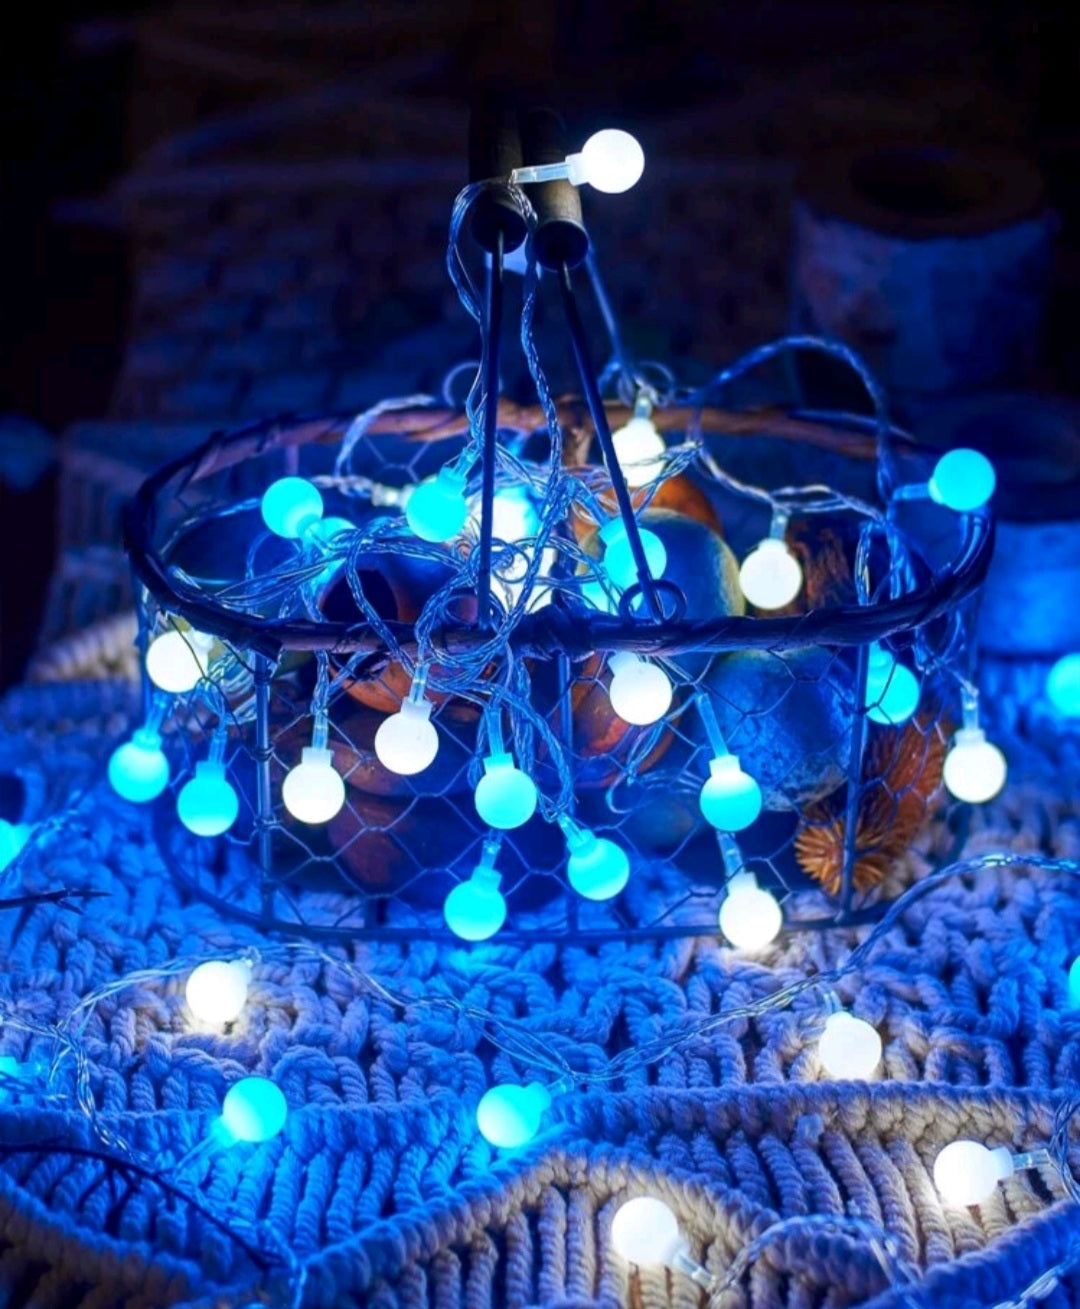 20 Leds Fairy Lights Ball Lights String, Battery Operated Lights